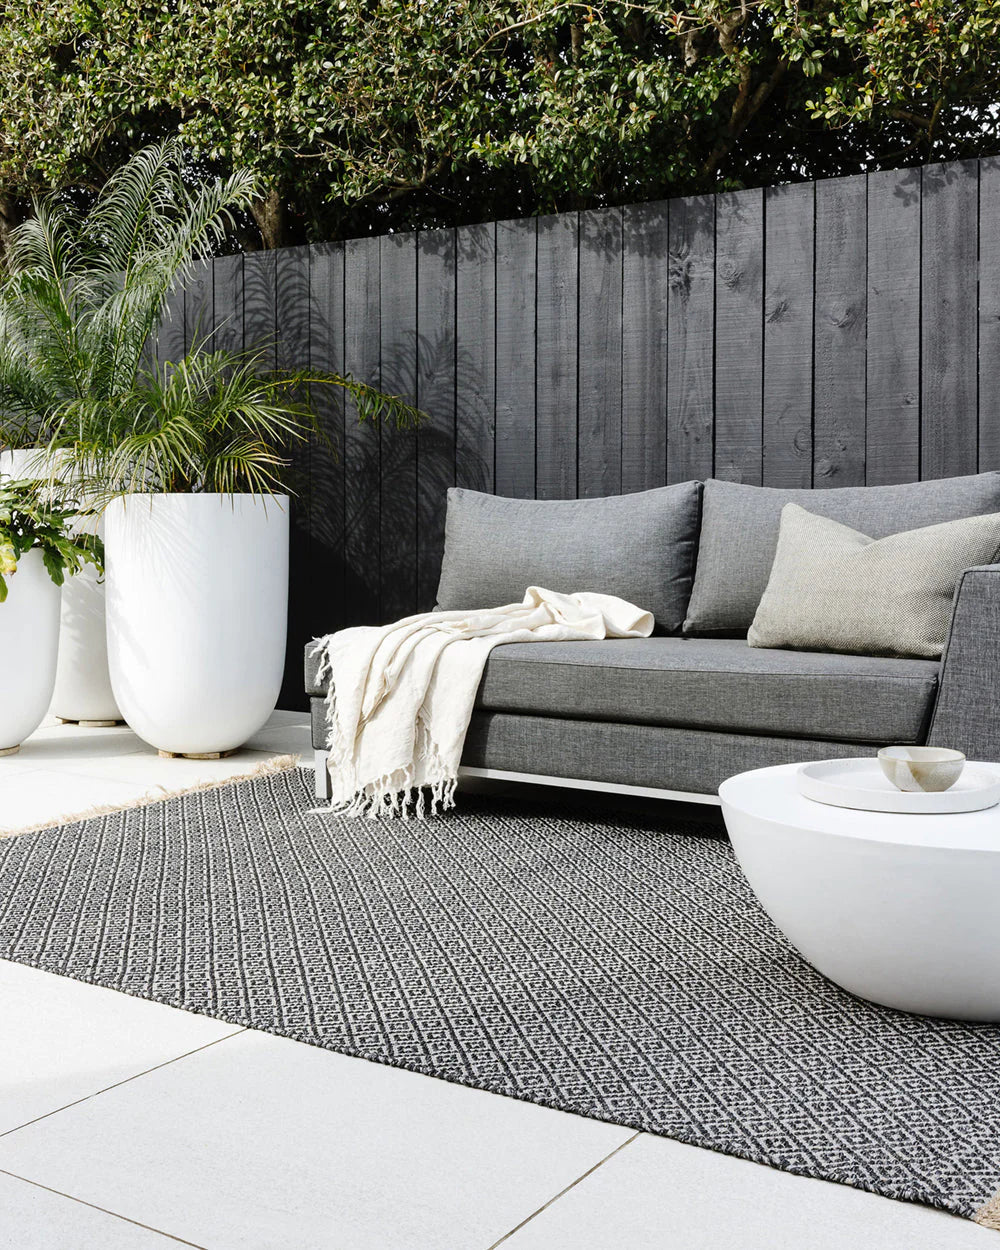 Reef Charcoal Outdoor Rug from Baya Furtex Stockist Make Your House A Home, Furniture Store Bendigo. Free Australia Wide Delivery.